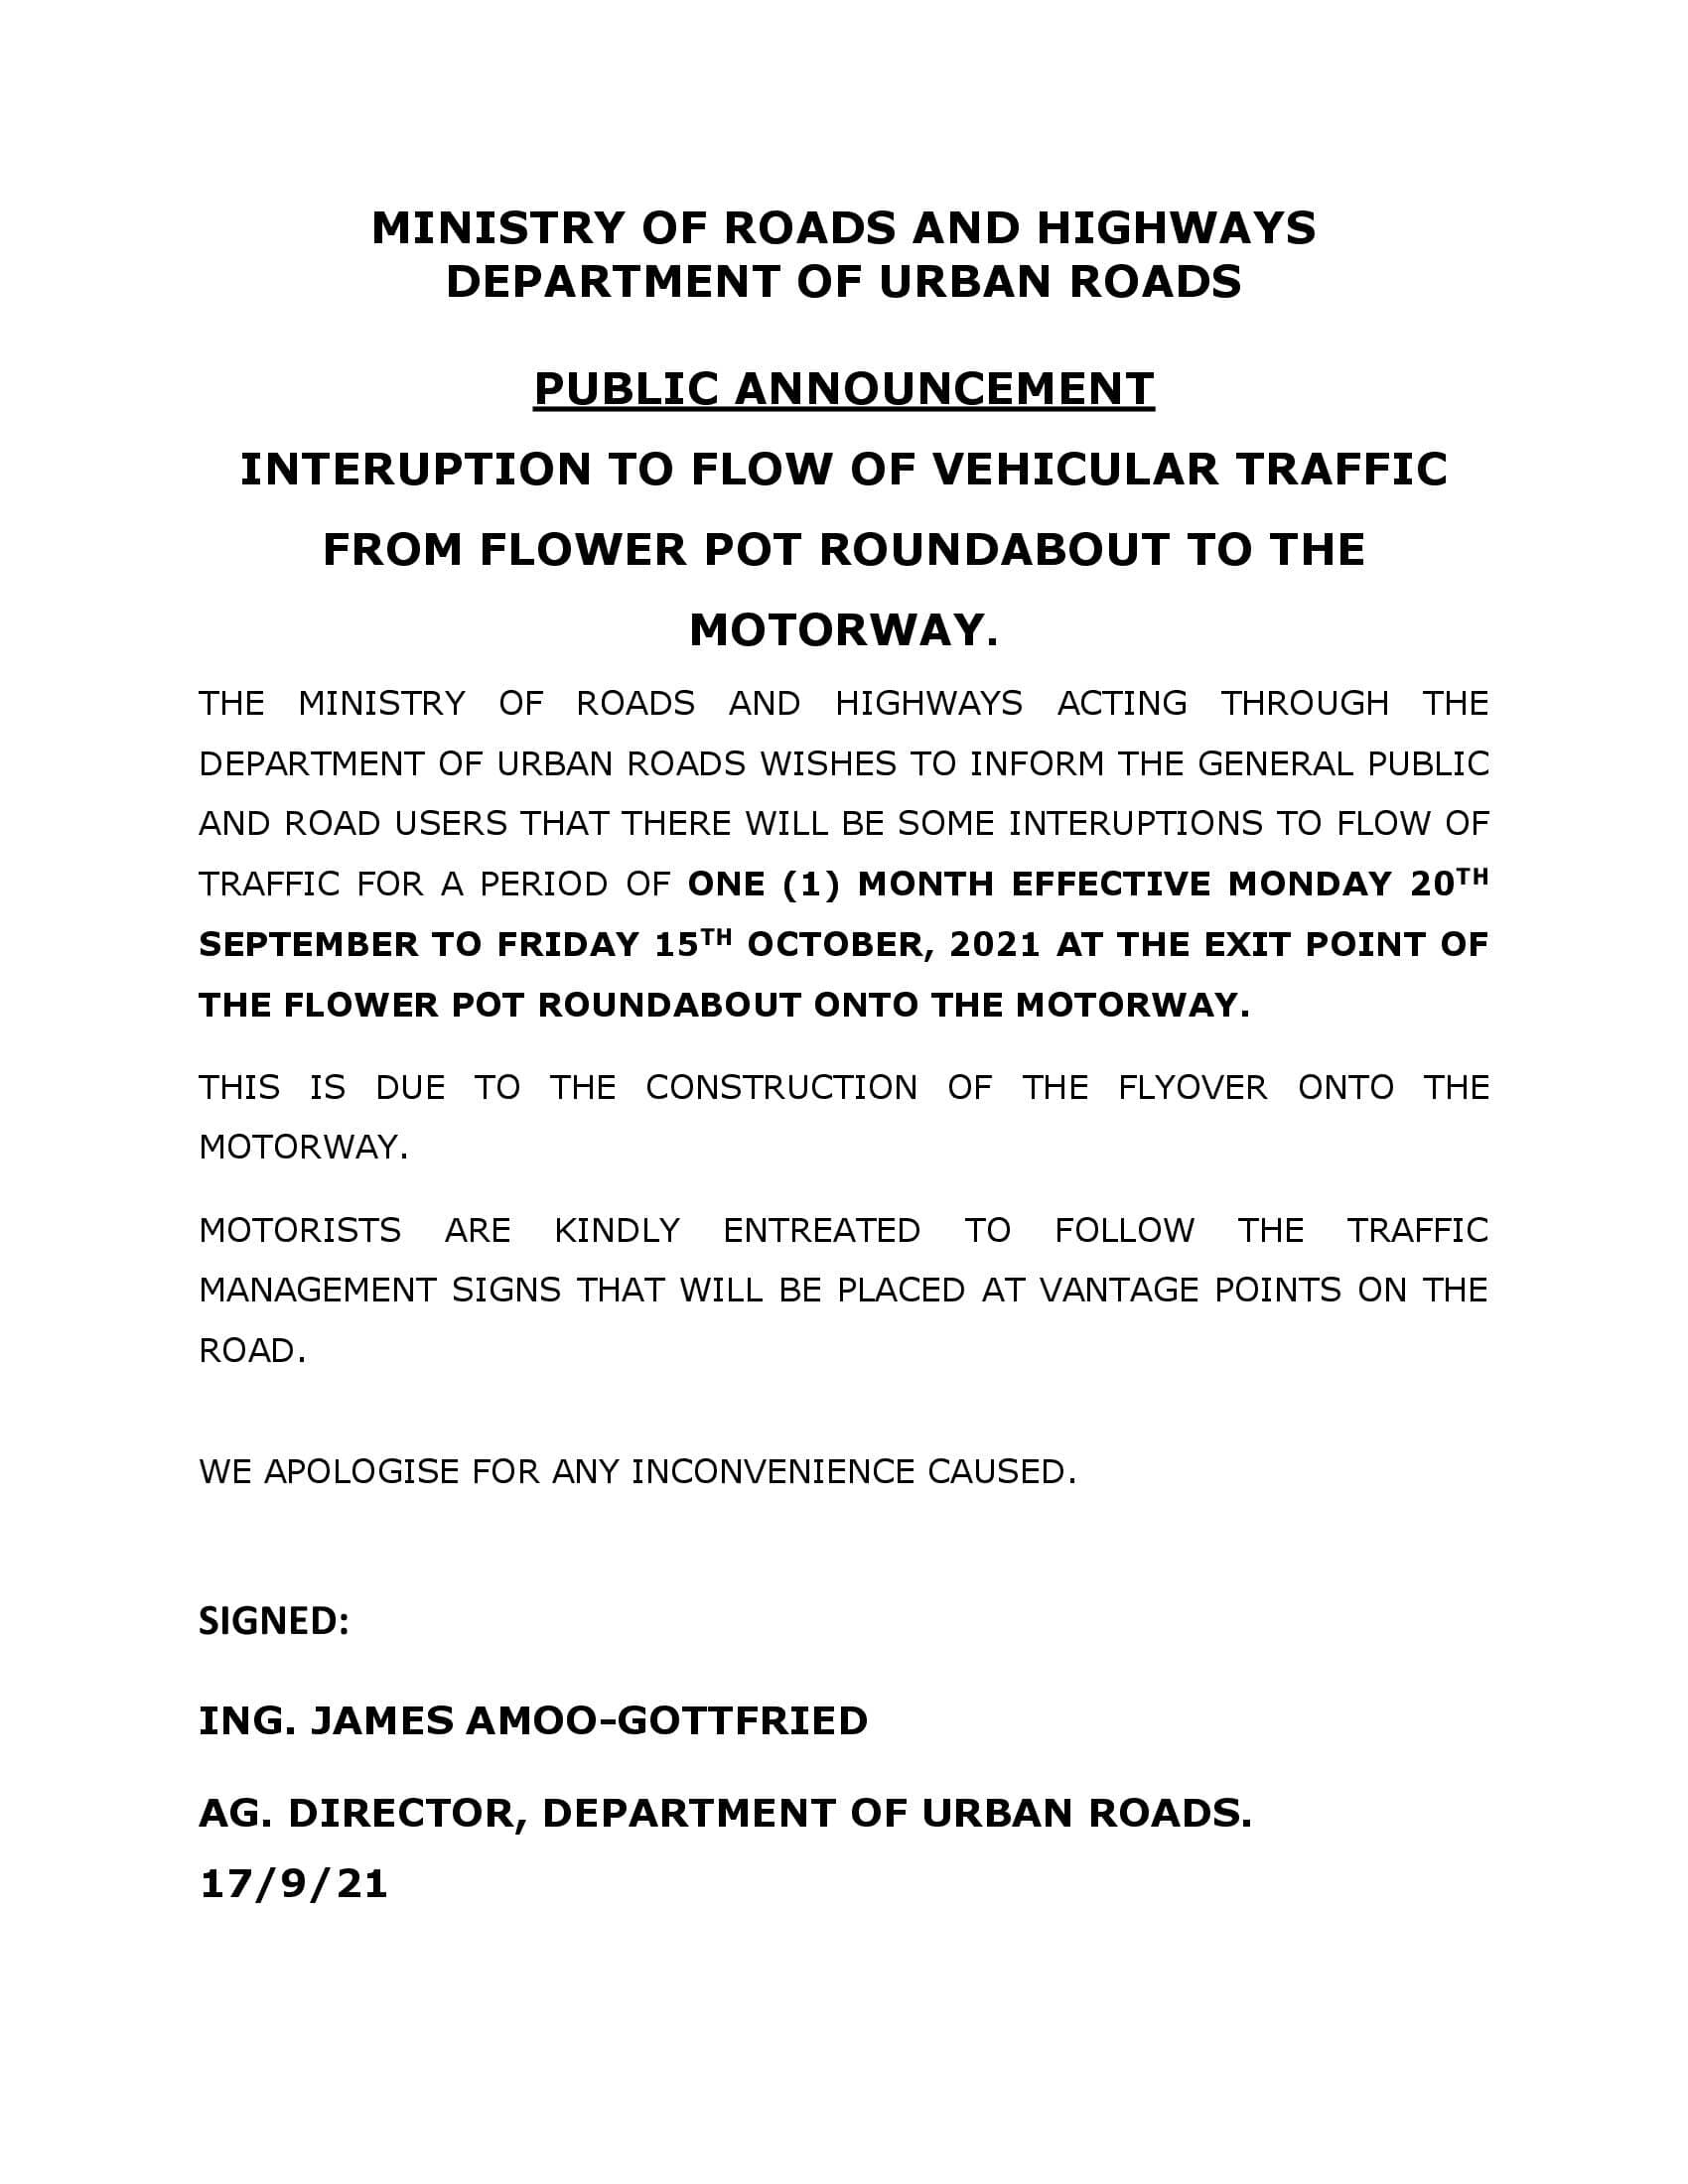 Flyover construction to interrupt traffic at Flower Pot Roundabout for 1 month